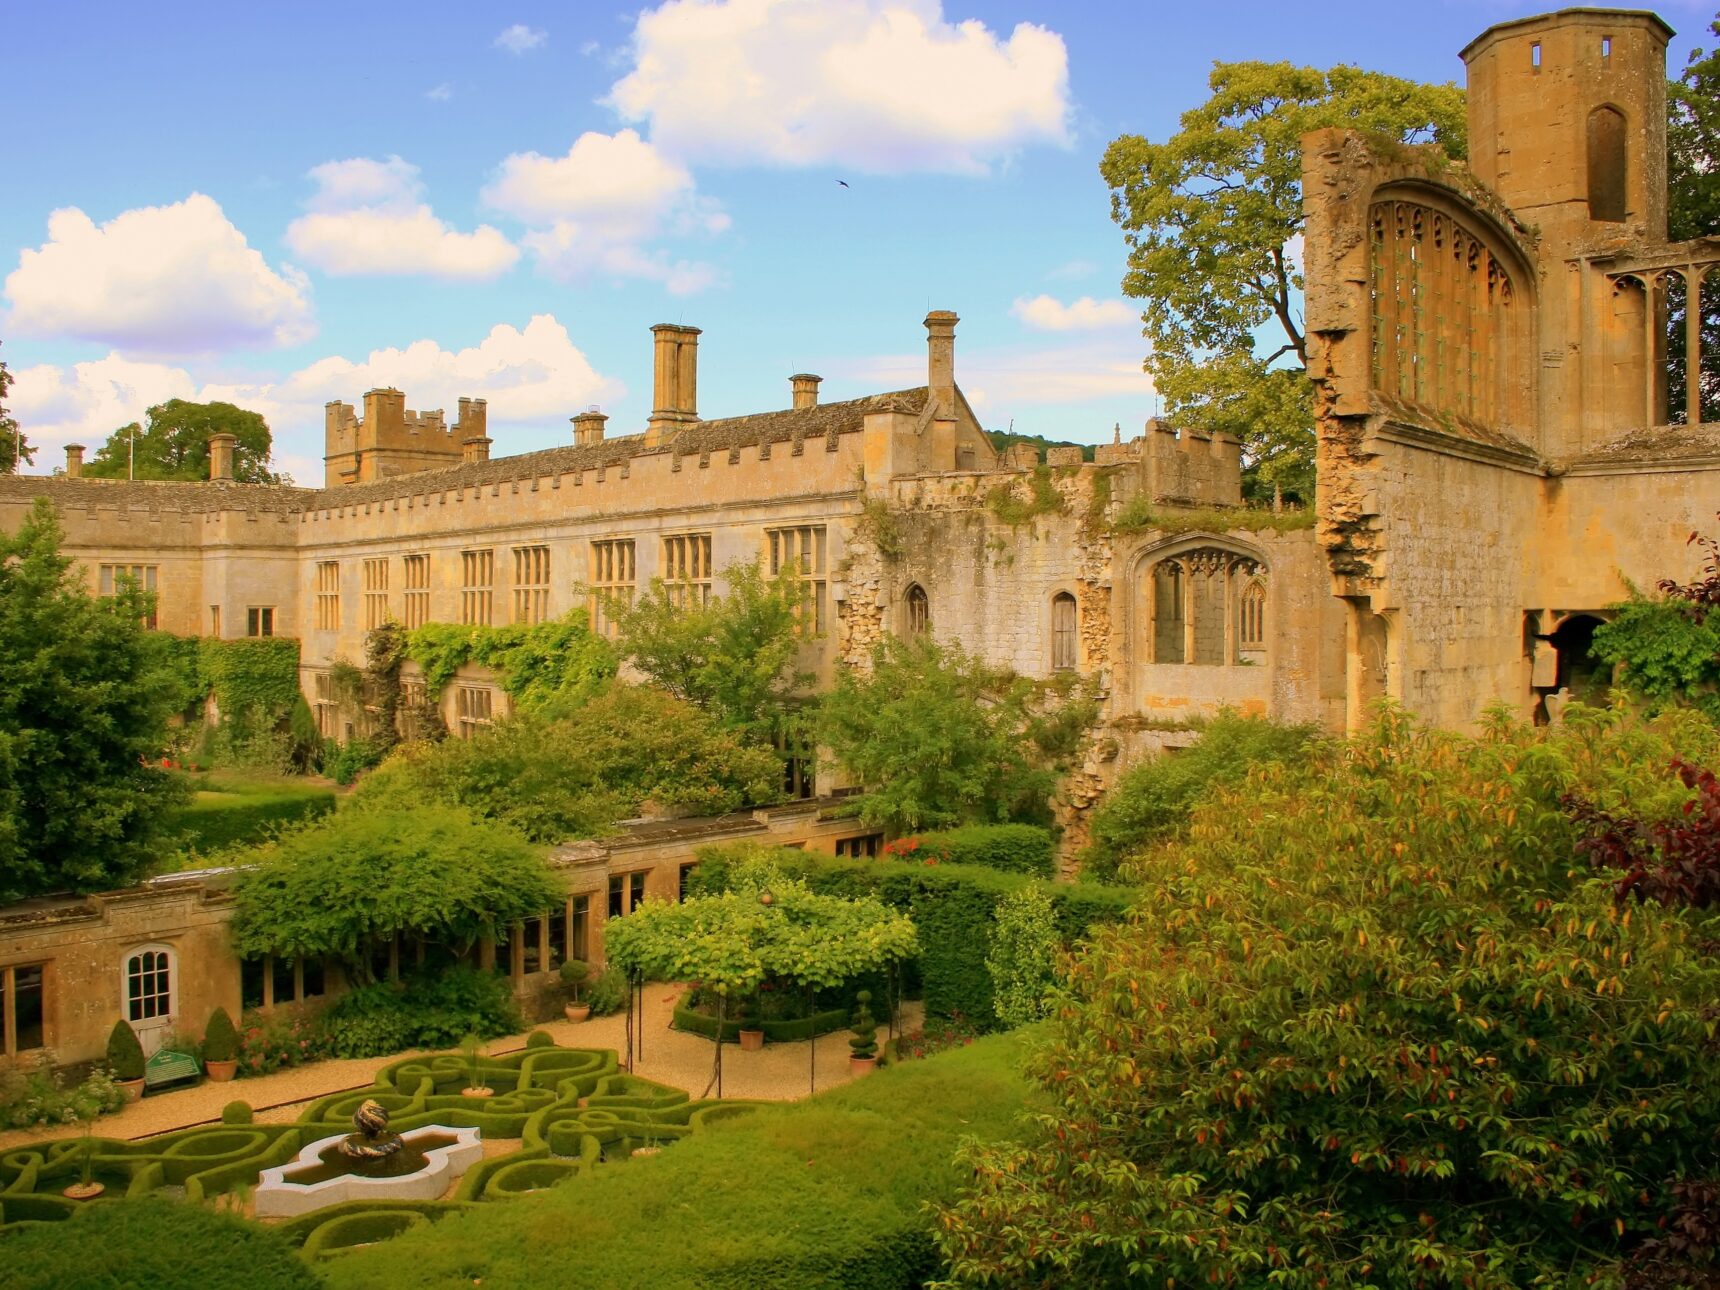 Sudeley's time softened walls and ruins have a fairy-tale quality